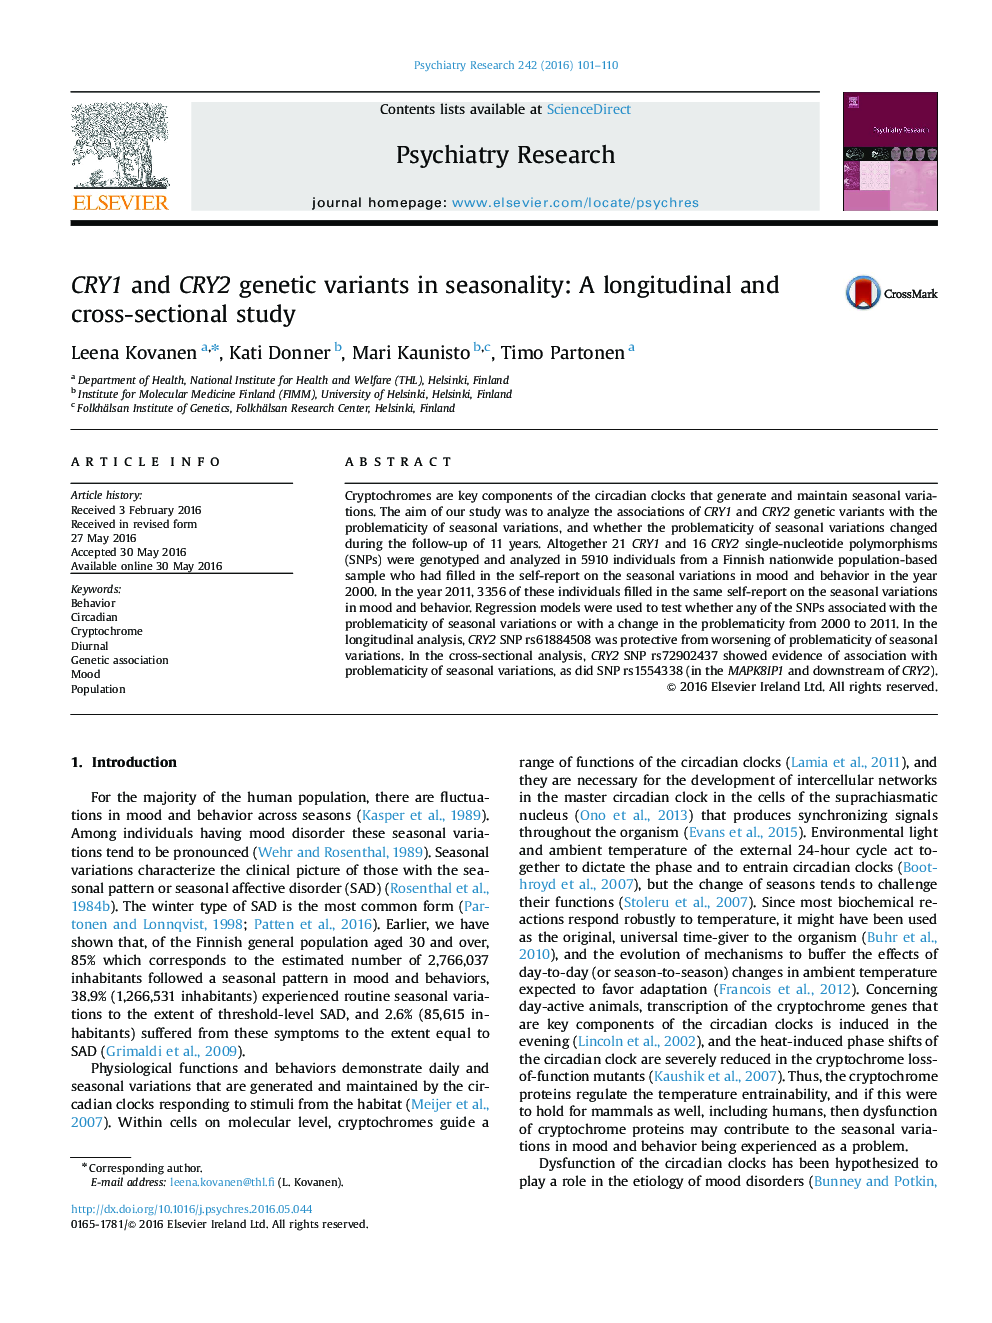 CRY1 and CRY2 genetic variants in seasonality: A longitudinal and cross-sectional study